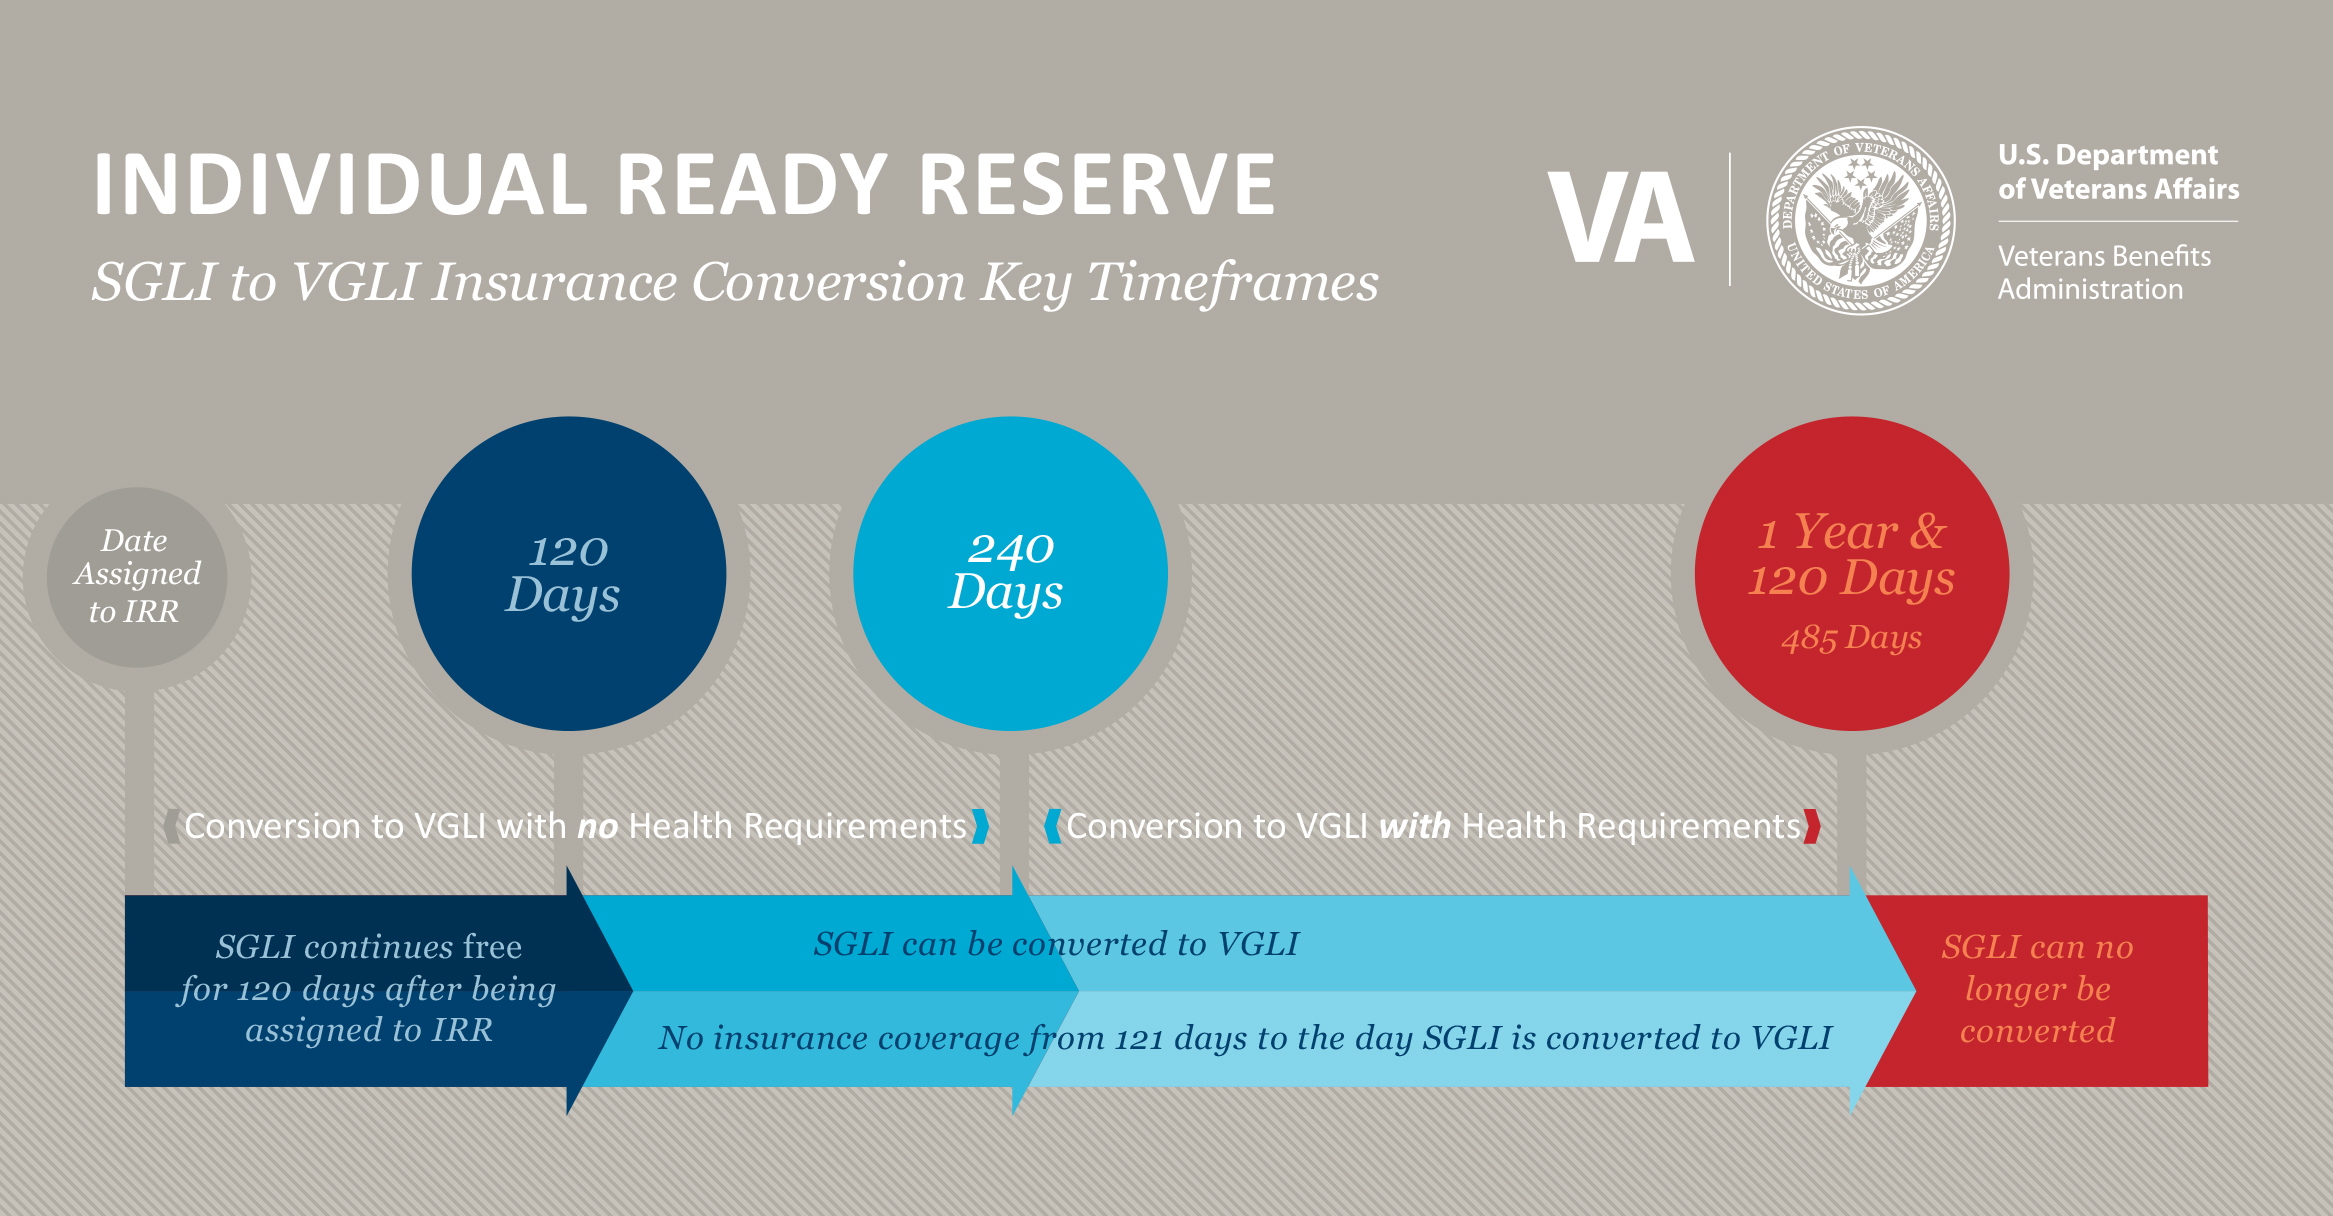 Individual Ready Reserve. SGLI to VGLI Insurance Conversion Key Timeframes. SGLI continues free for 120 days after being assigned to IRR. SGLI can be converted to VGLI without health requirements within 240 days from the date you were assigned to IRR. Conversion to VGLI with 1 year and 120 days requires health requirements.